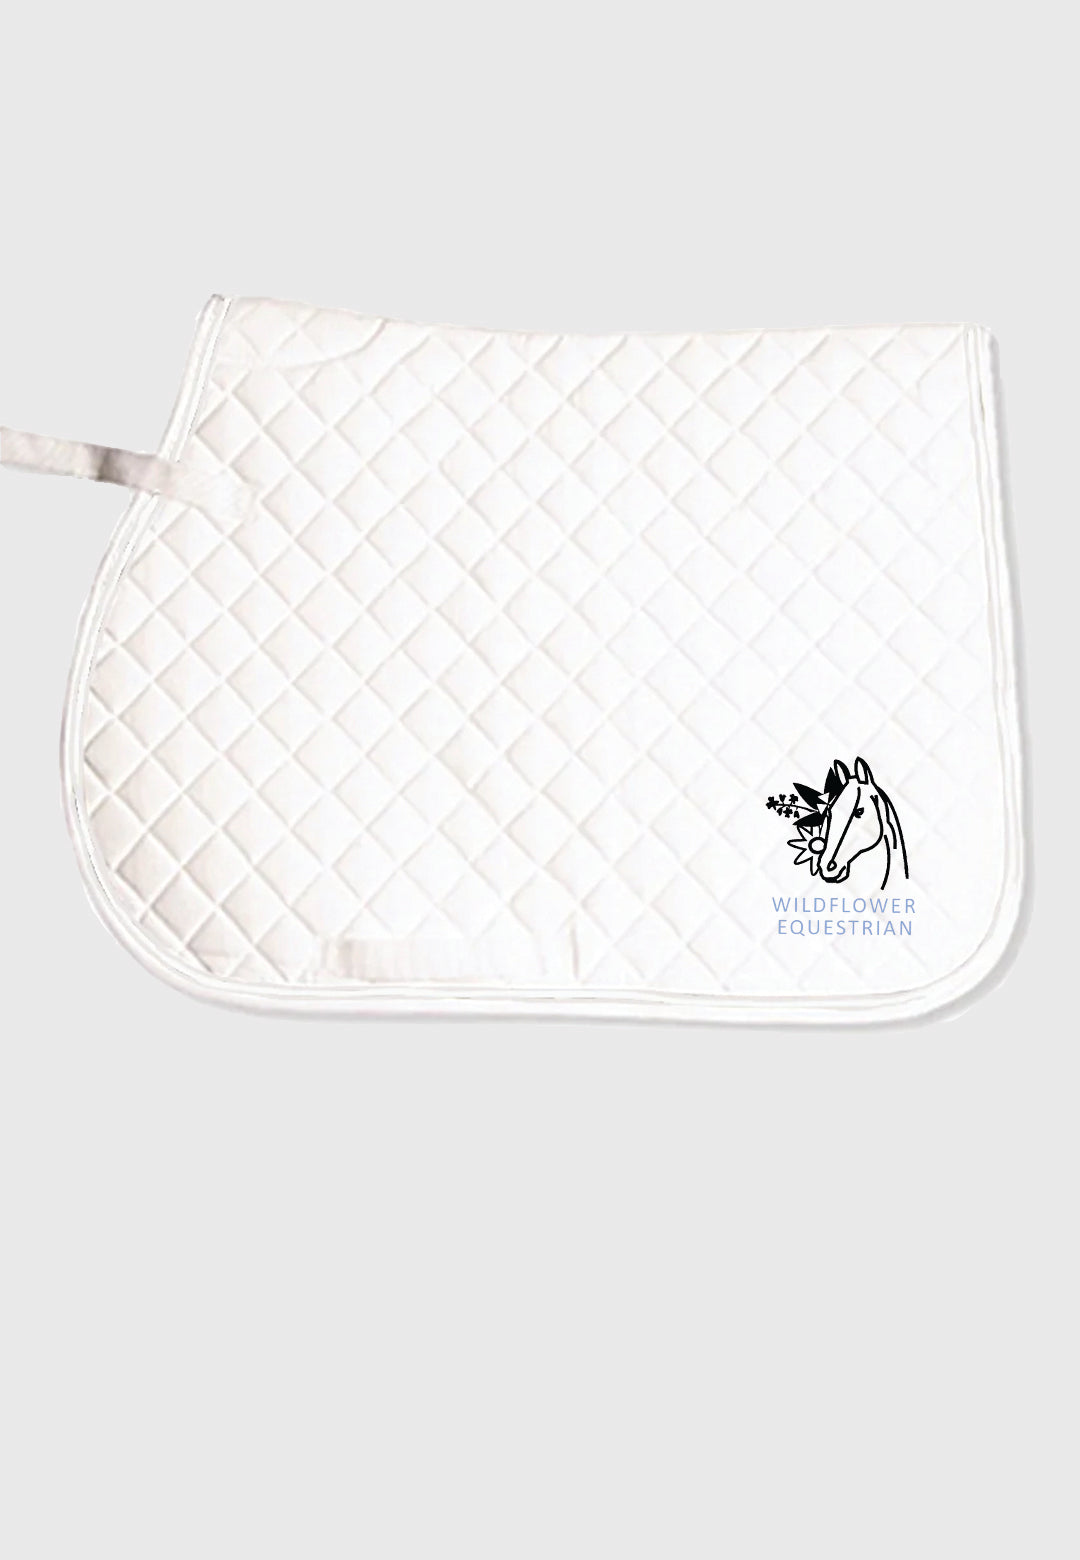 Wildflower Equestrian Jacks Imports All-Purpose Saddle Pad, 2 Piping Color Options